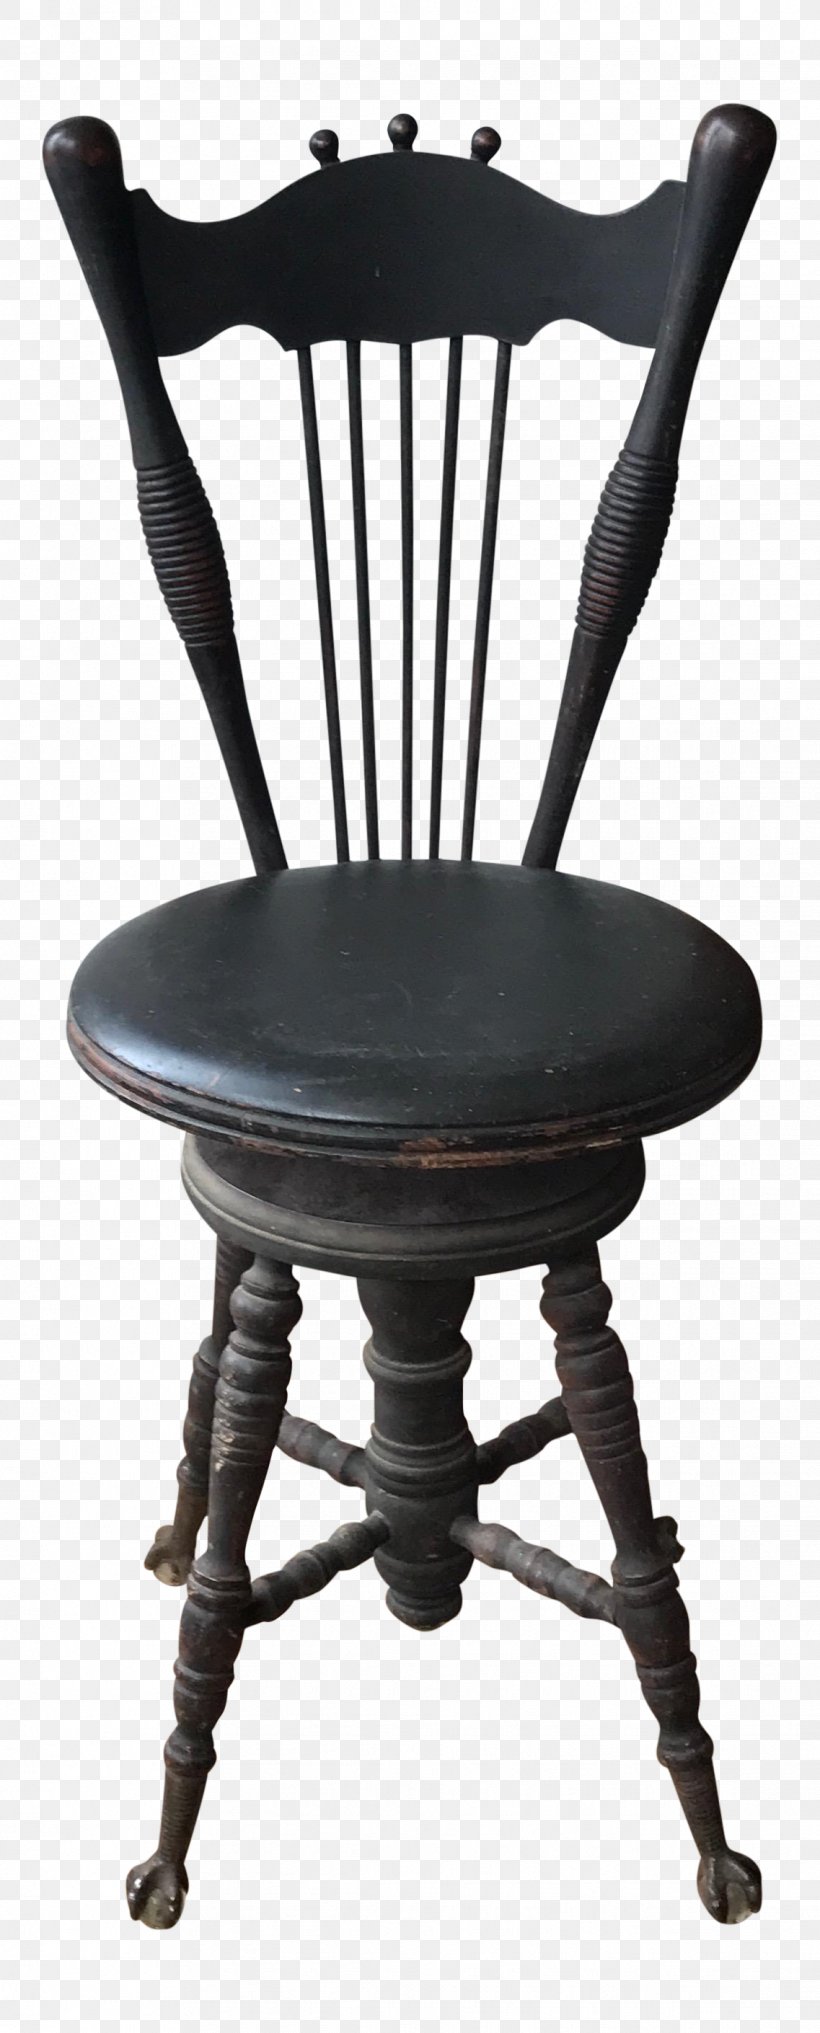 Furniture Chair, PNG, 1137x2820px, Furniture, Chair, Iron Maiden, Iron Man, Table Download Free